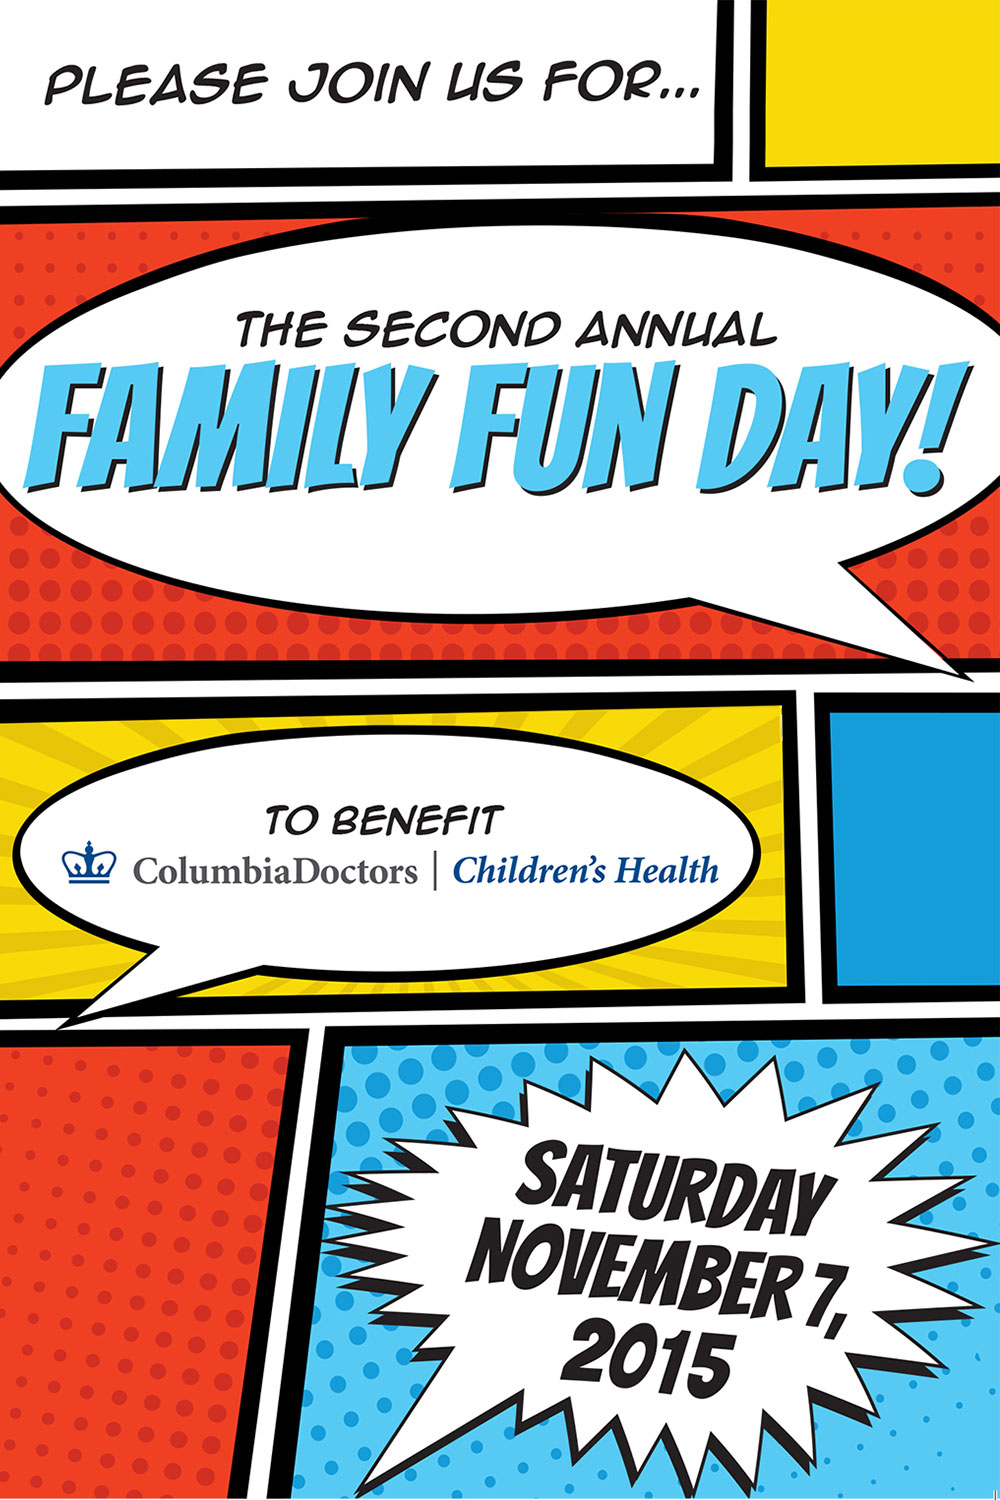 CLIENT:Columbia University Medical Center

DATE:November 2015

PROJECT:Invitation for Family Fun Day